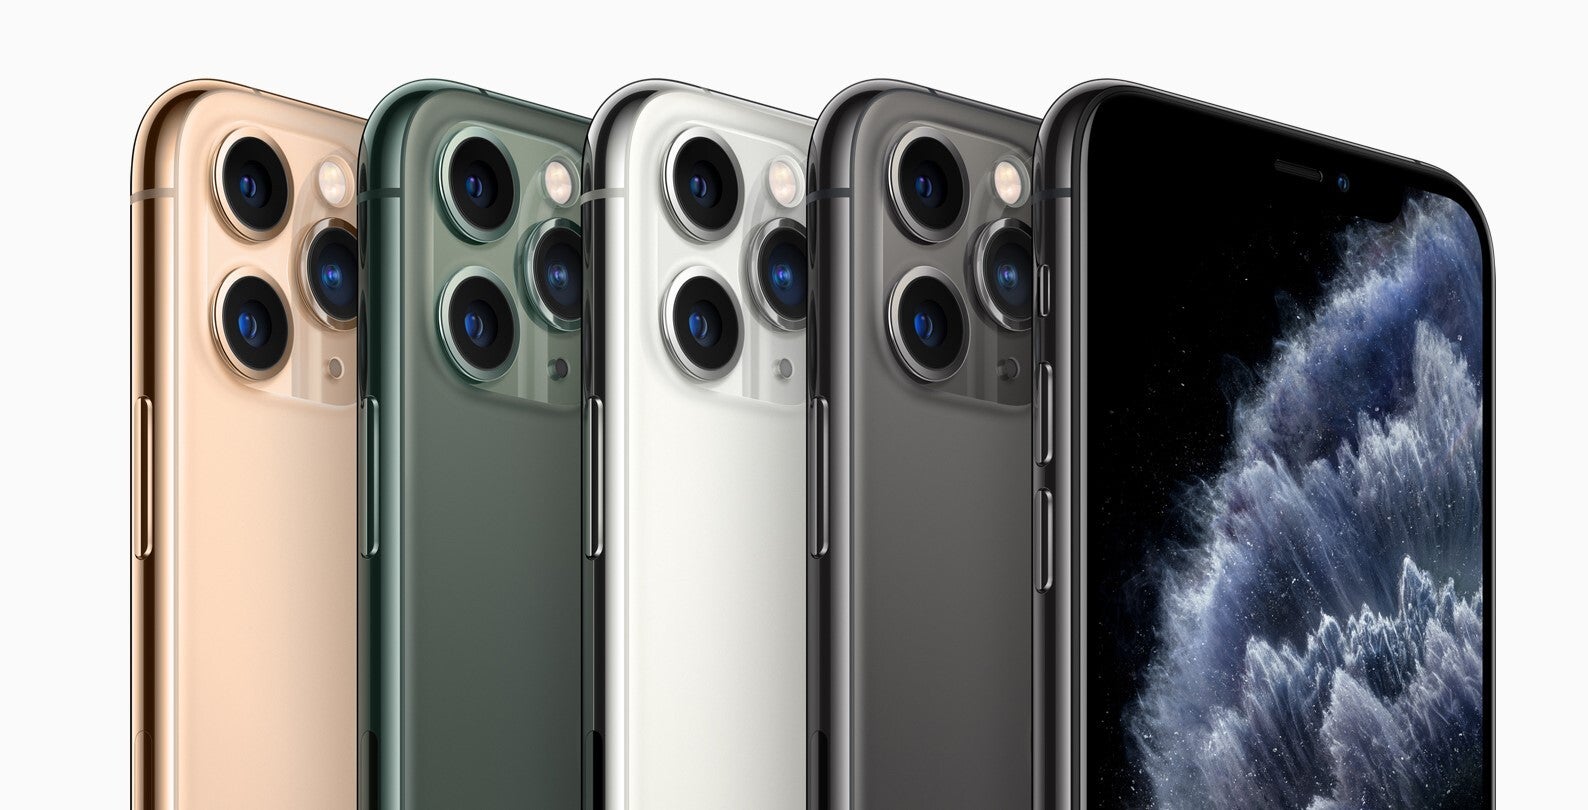 Nothing says Pro like a matte finish - Why is the iPhone 11 Pro called iPhone 11 Pro?